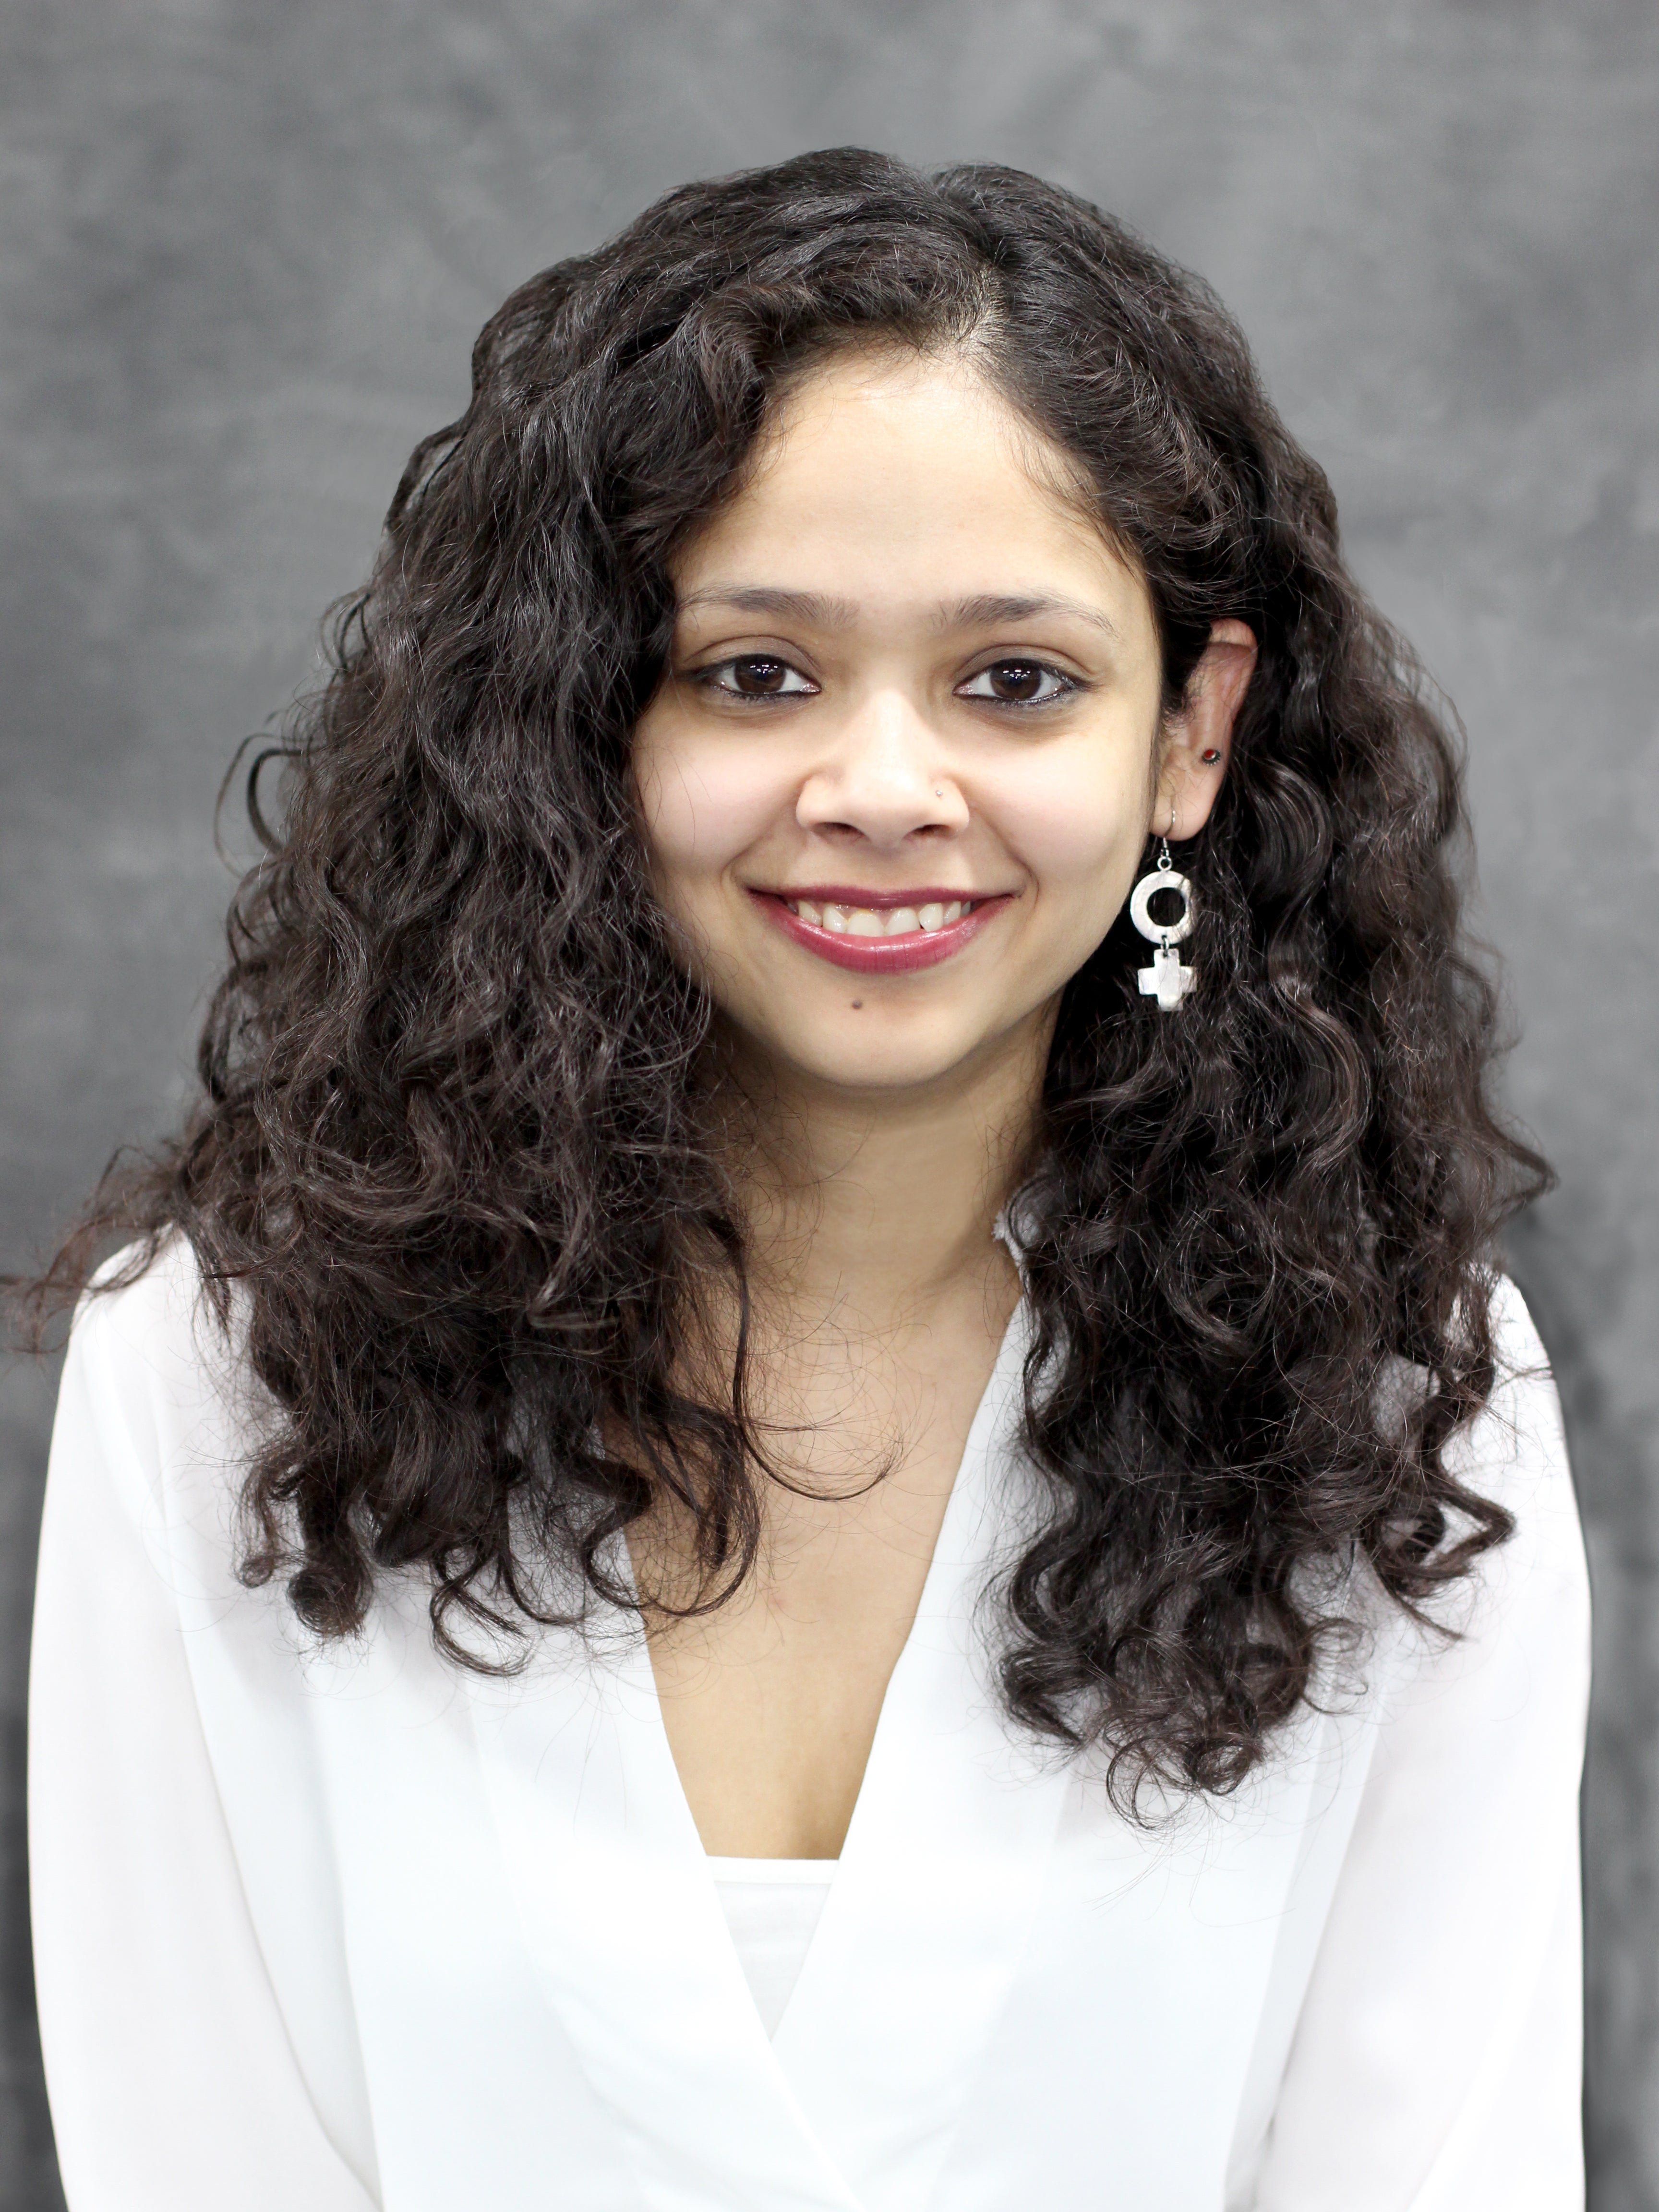 Women with long brown curly hair in a white shirt in front of a grey background